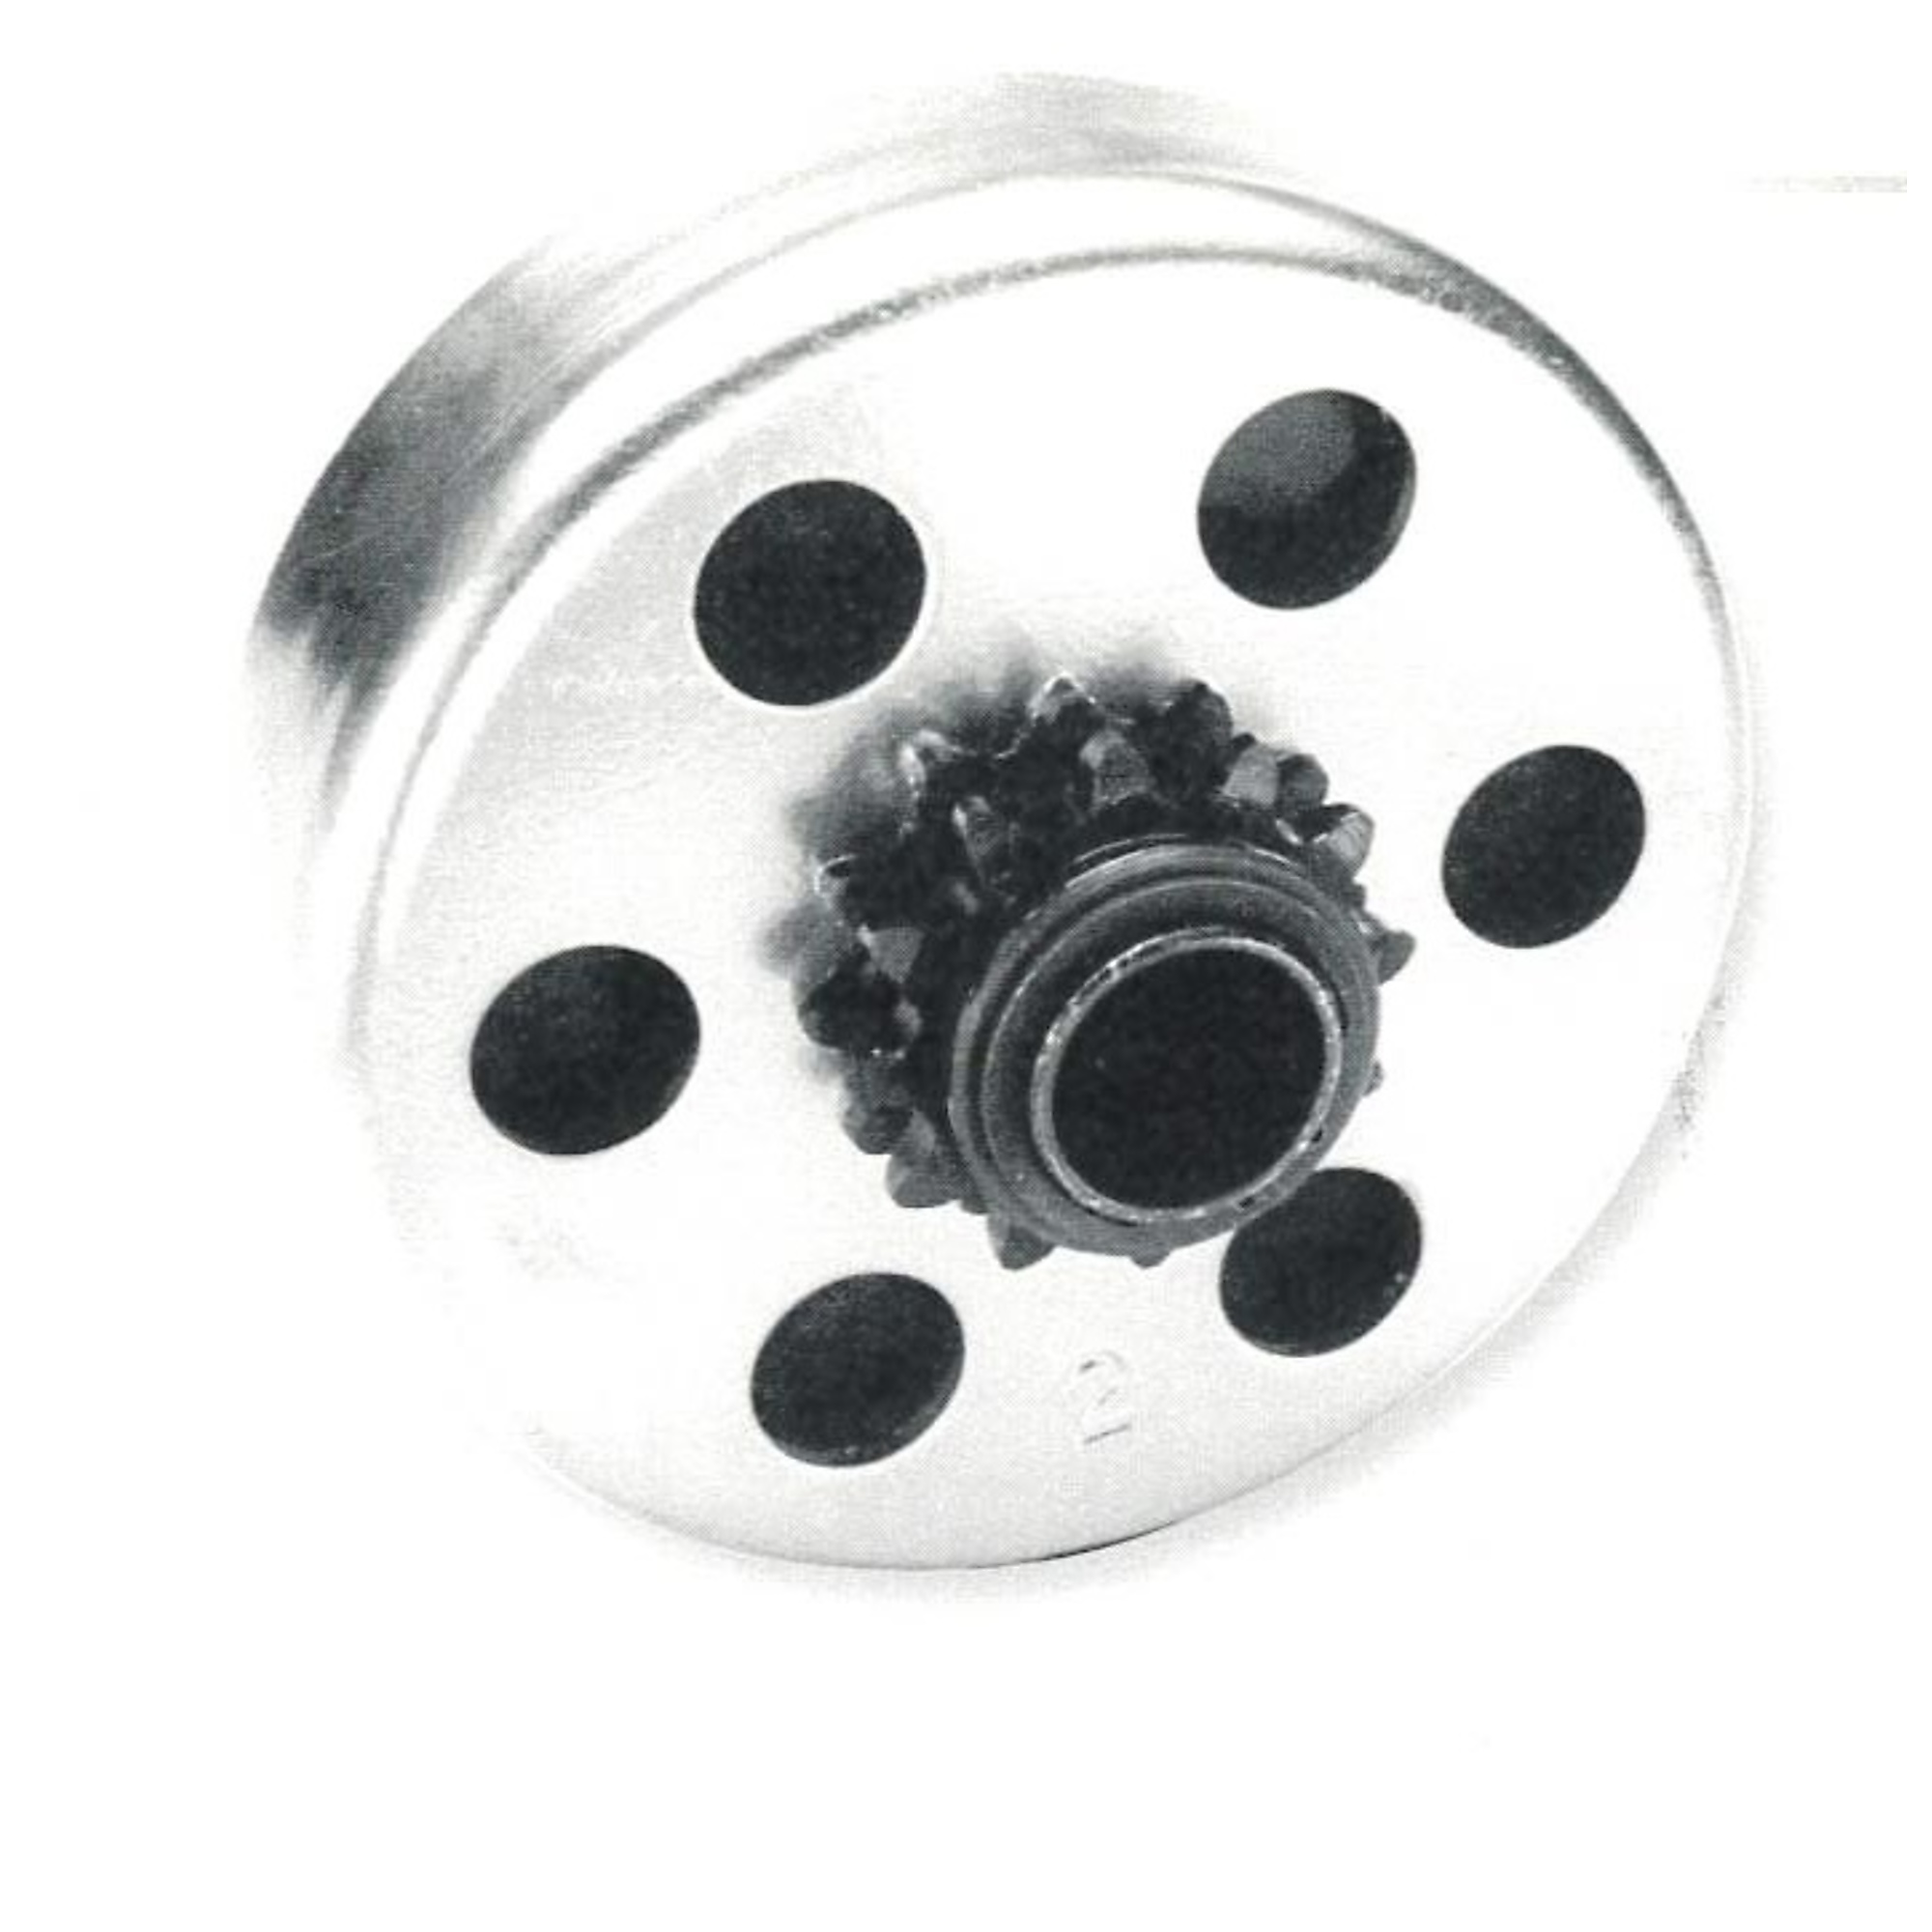 Comet, 3/4Inch Bore, 10 tooth, 40/41 Pitch Sprocket, Bore Diameter 3/4 in, Model 217633A